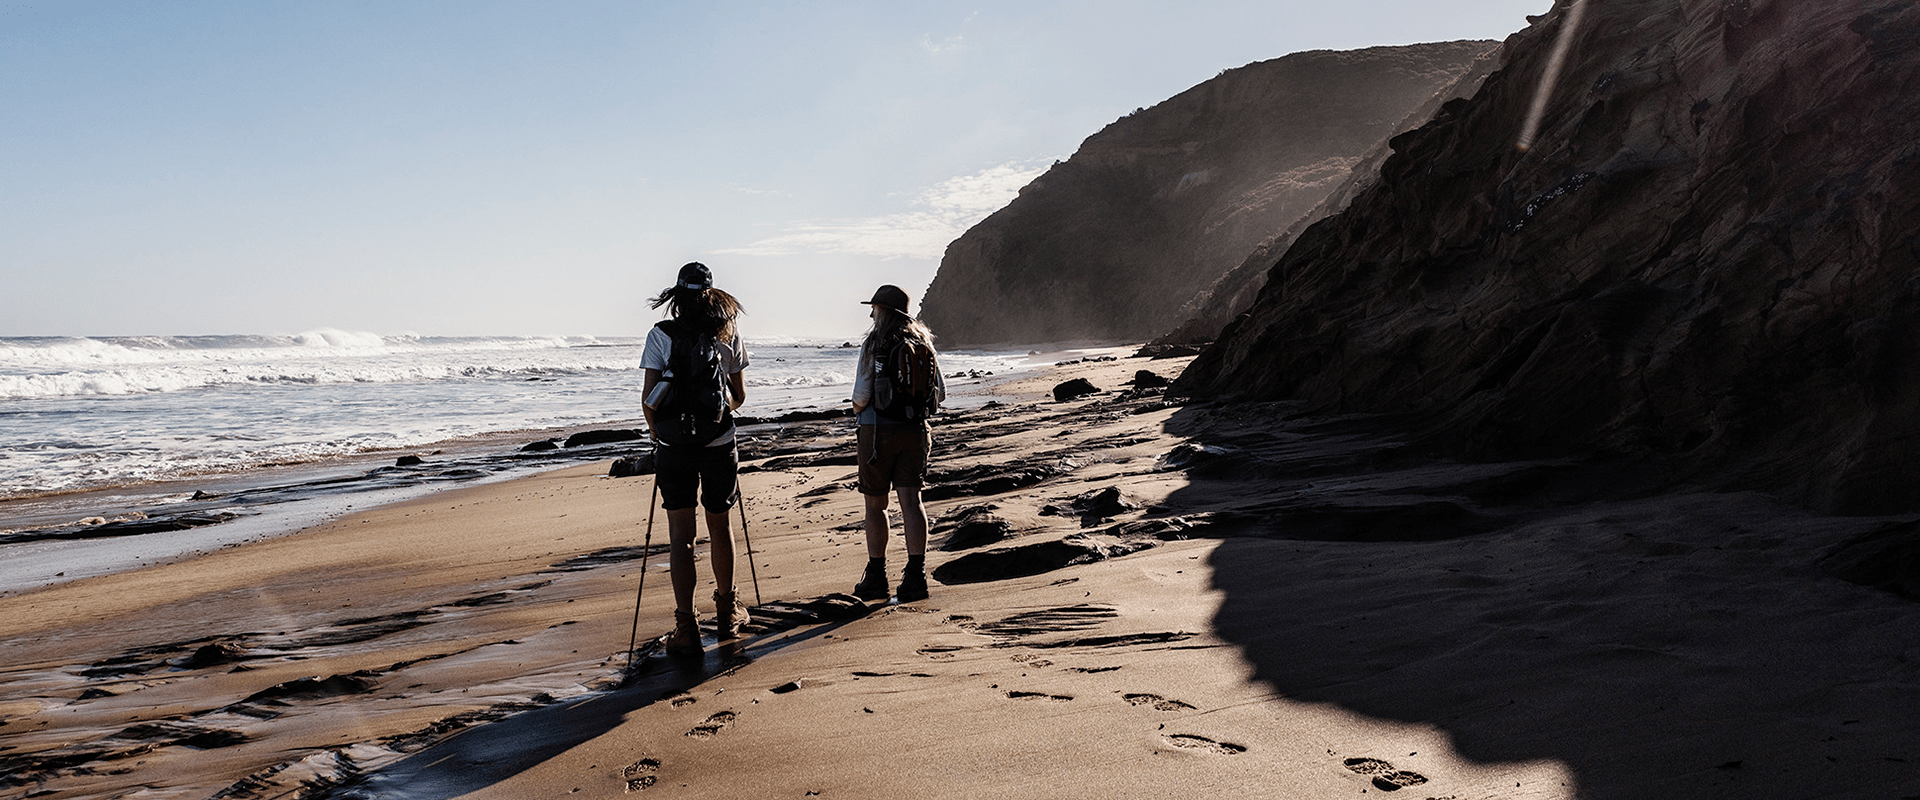 A couple carrying hiking backpacks and walking sticks walks on a sandy beach with waves on the left side and a rocky cliff on the right side.